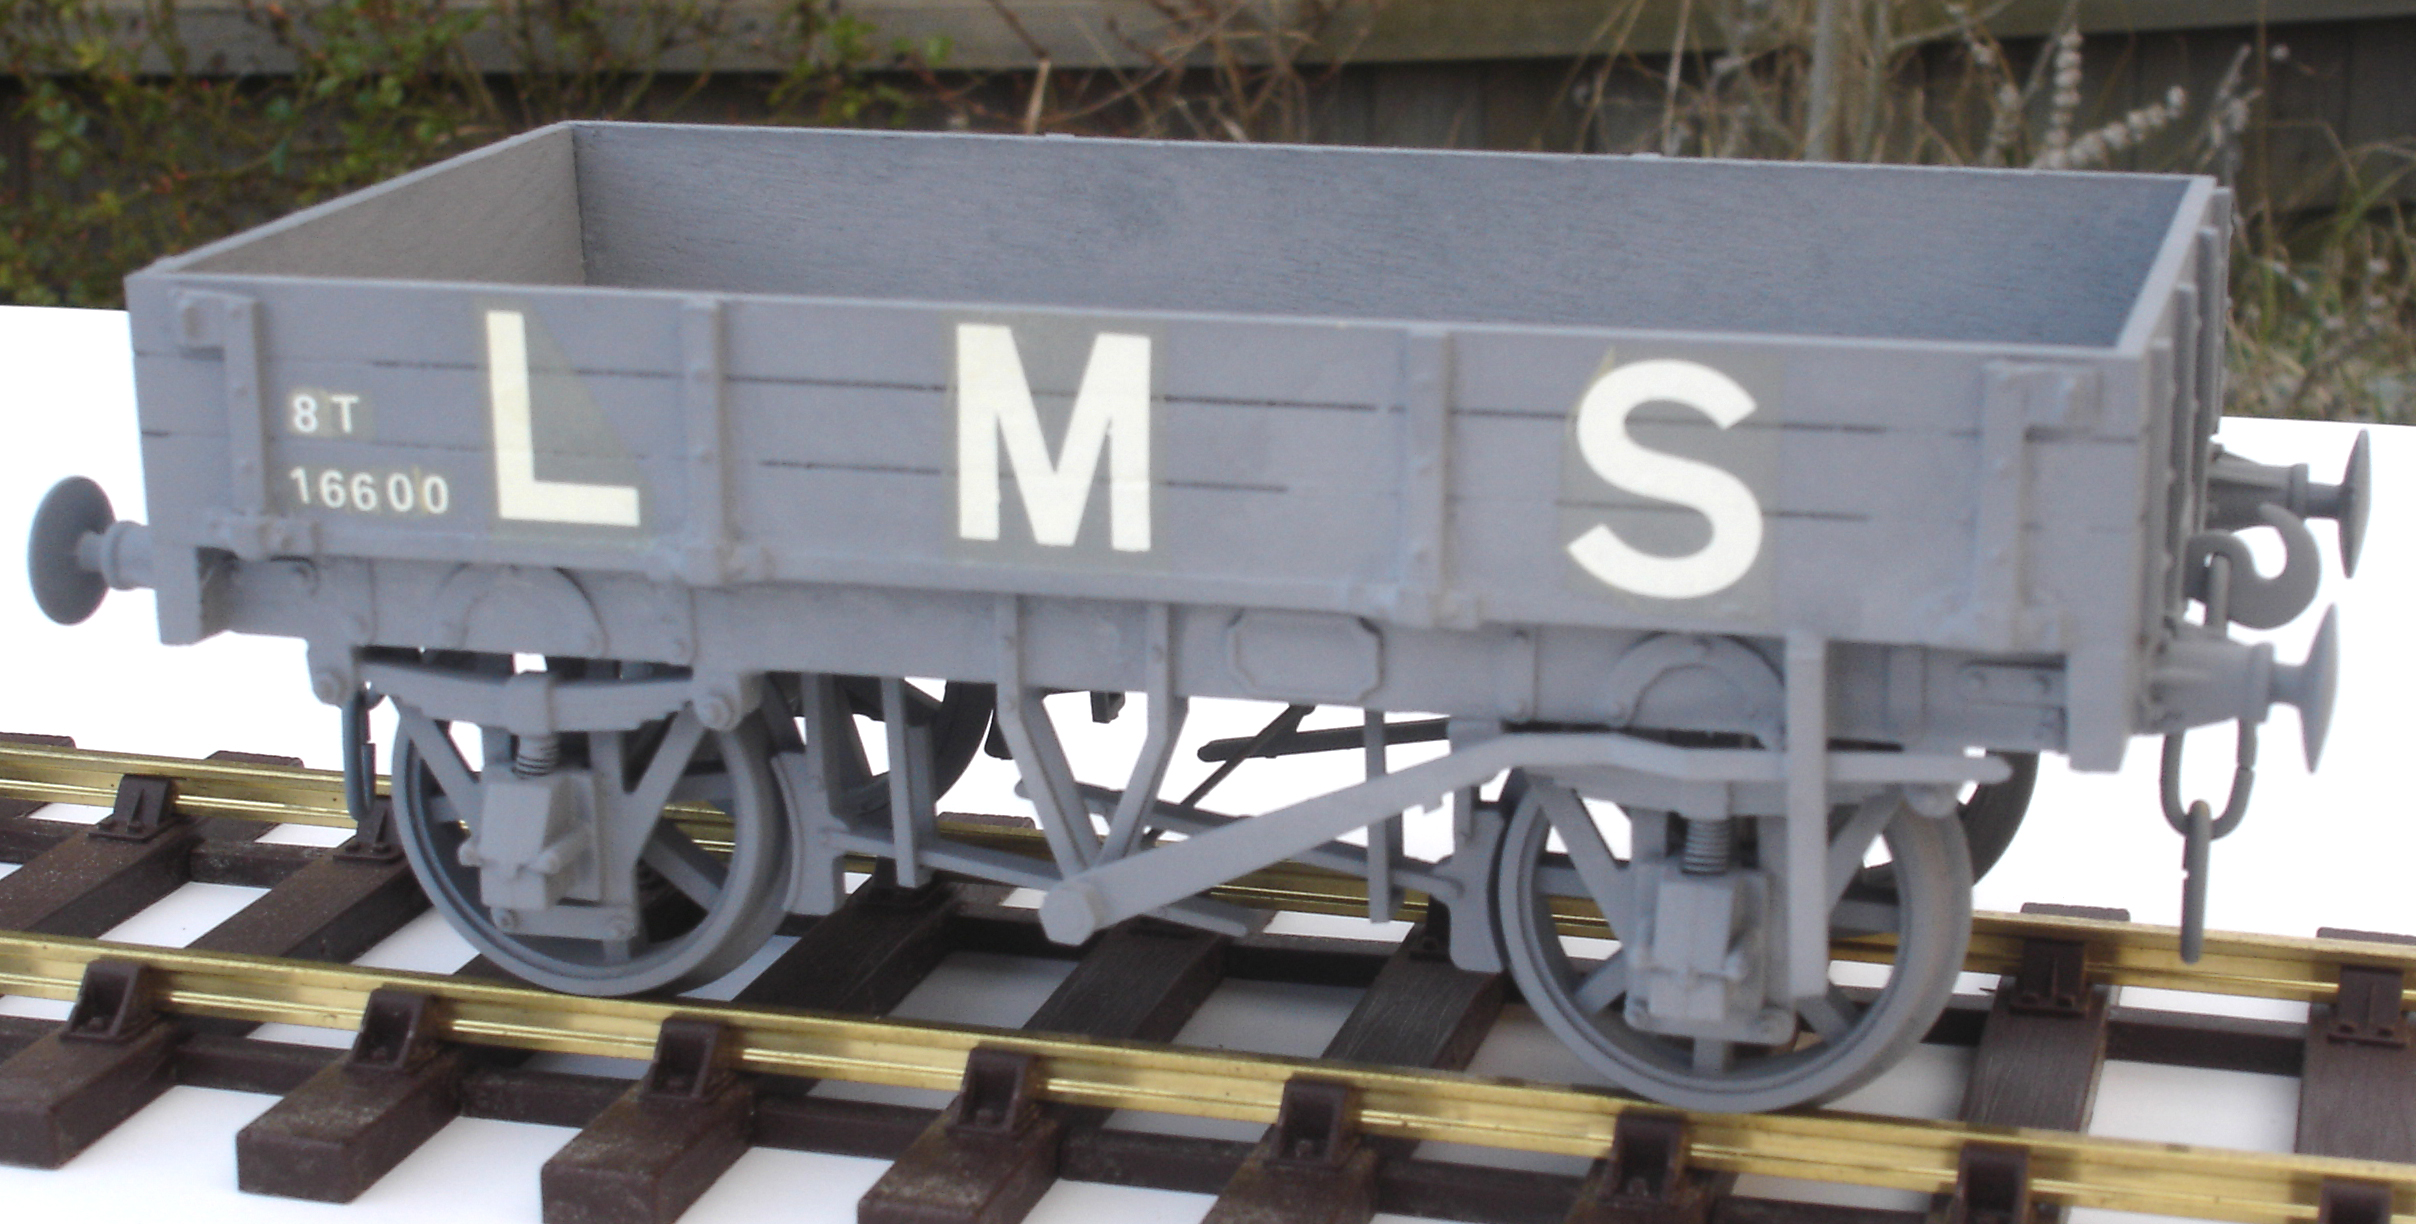 LMS Open Wagon 8t (Body Kit Only)